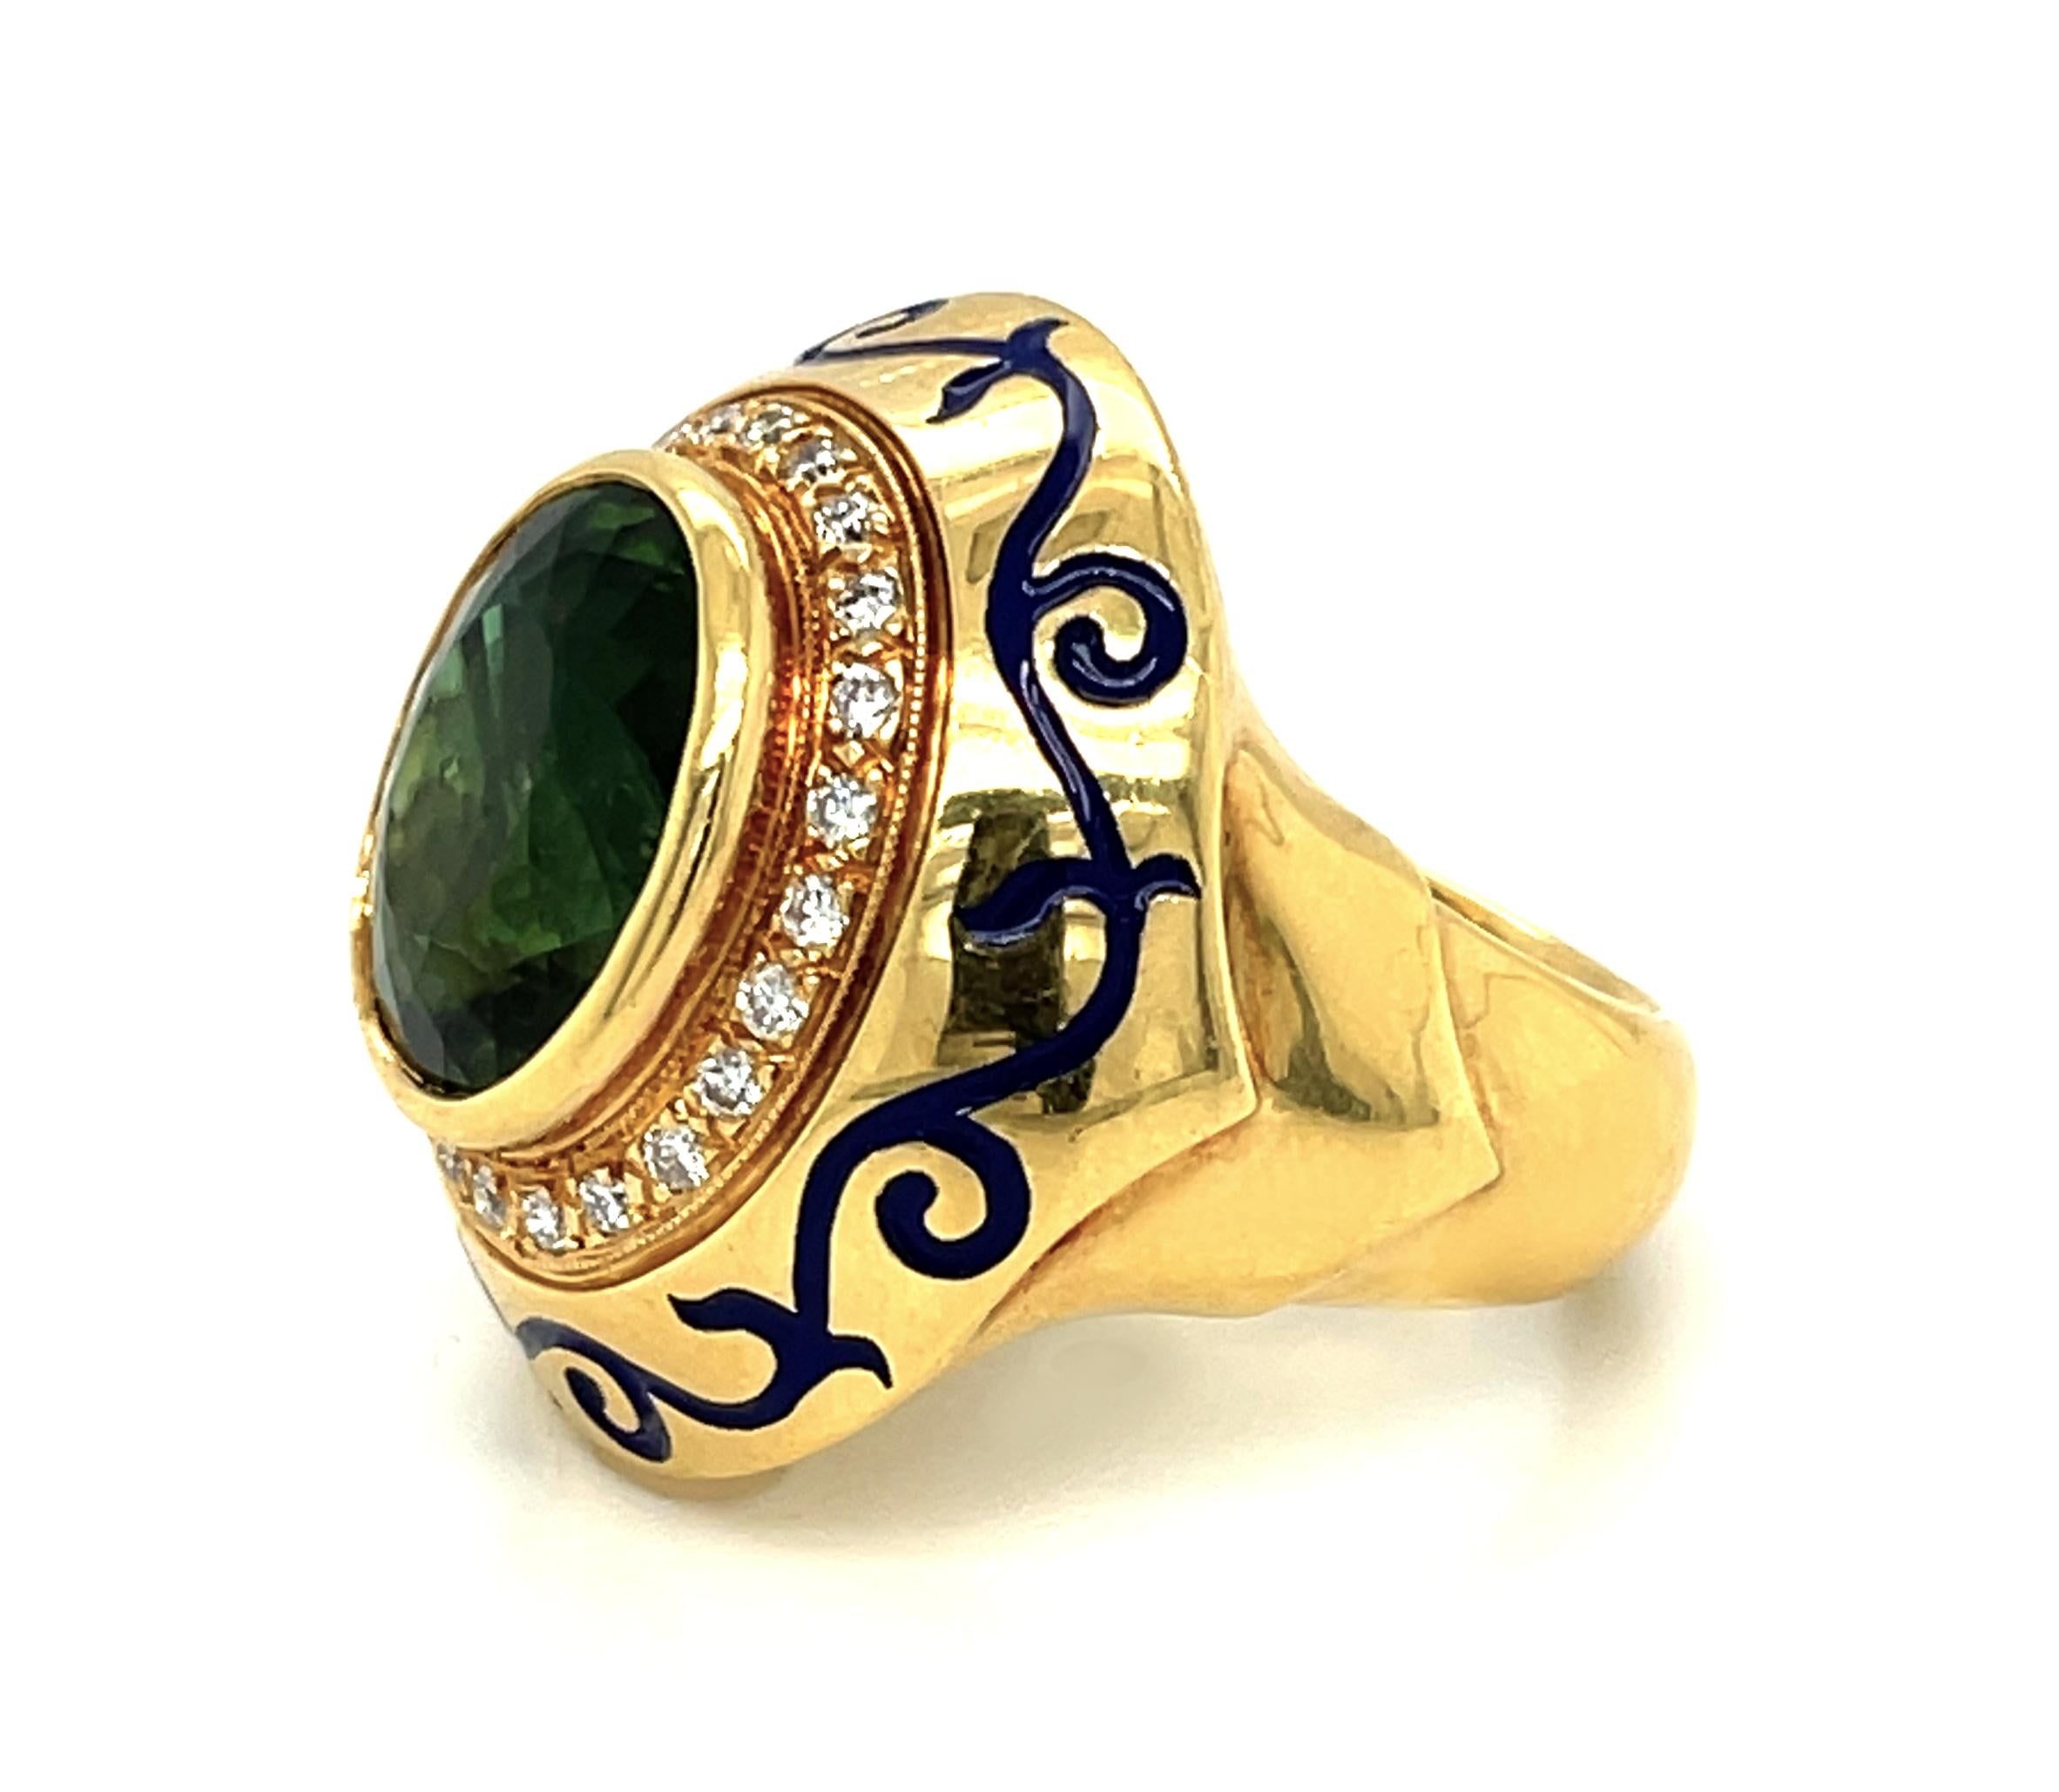 Oval Cut Green Tourmaline and Diamond Ring in 18k Yellow Gold with Blue Enamel For Sale